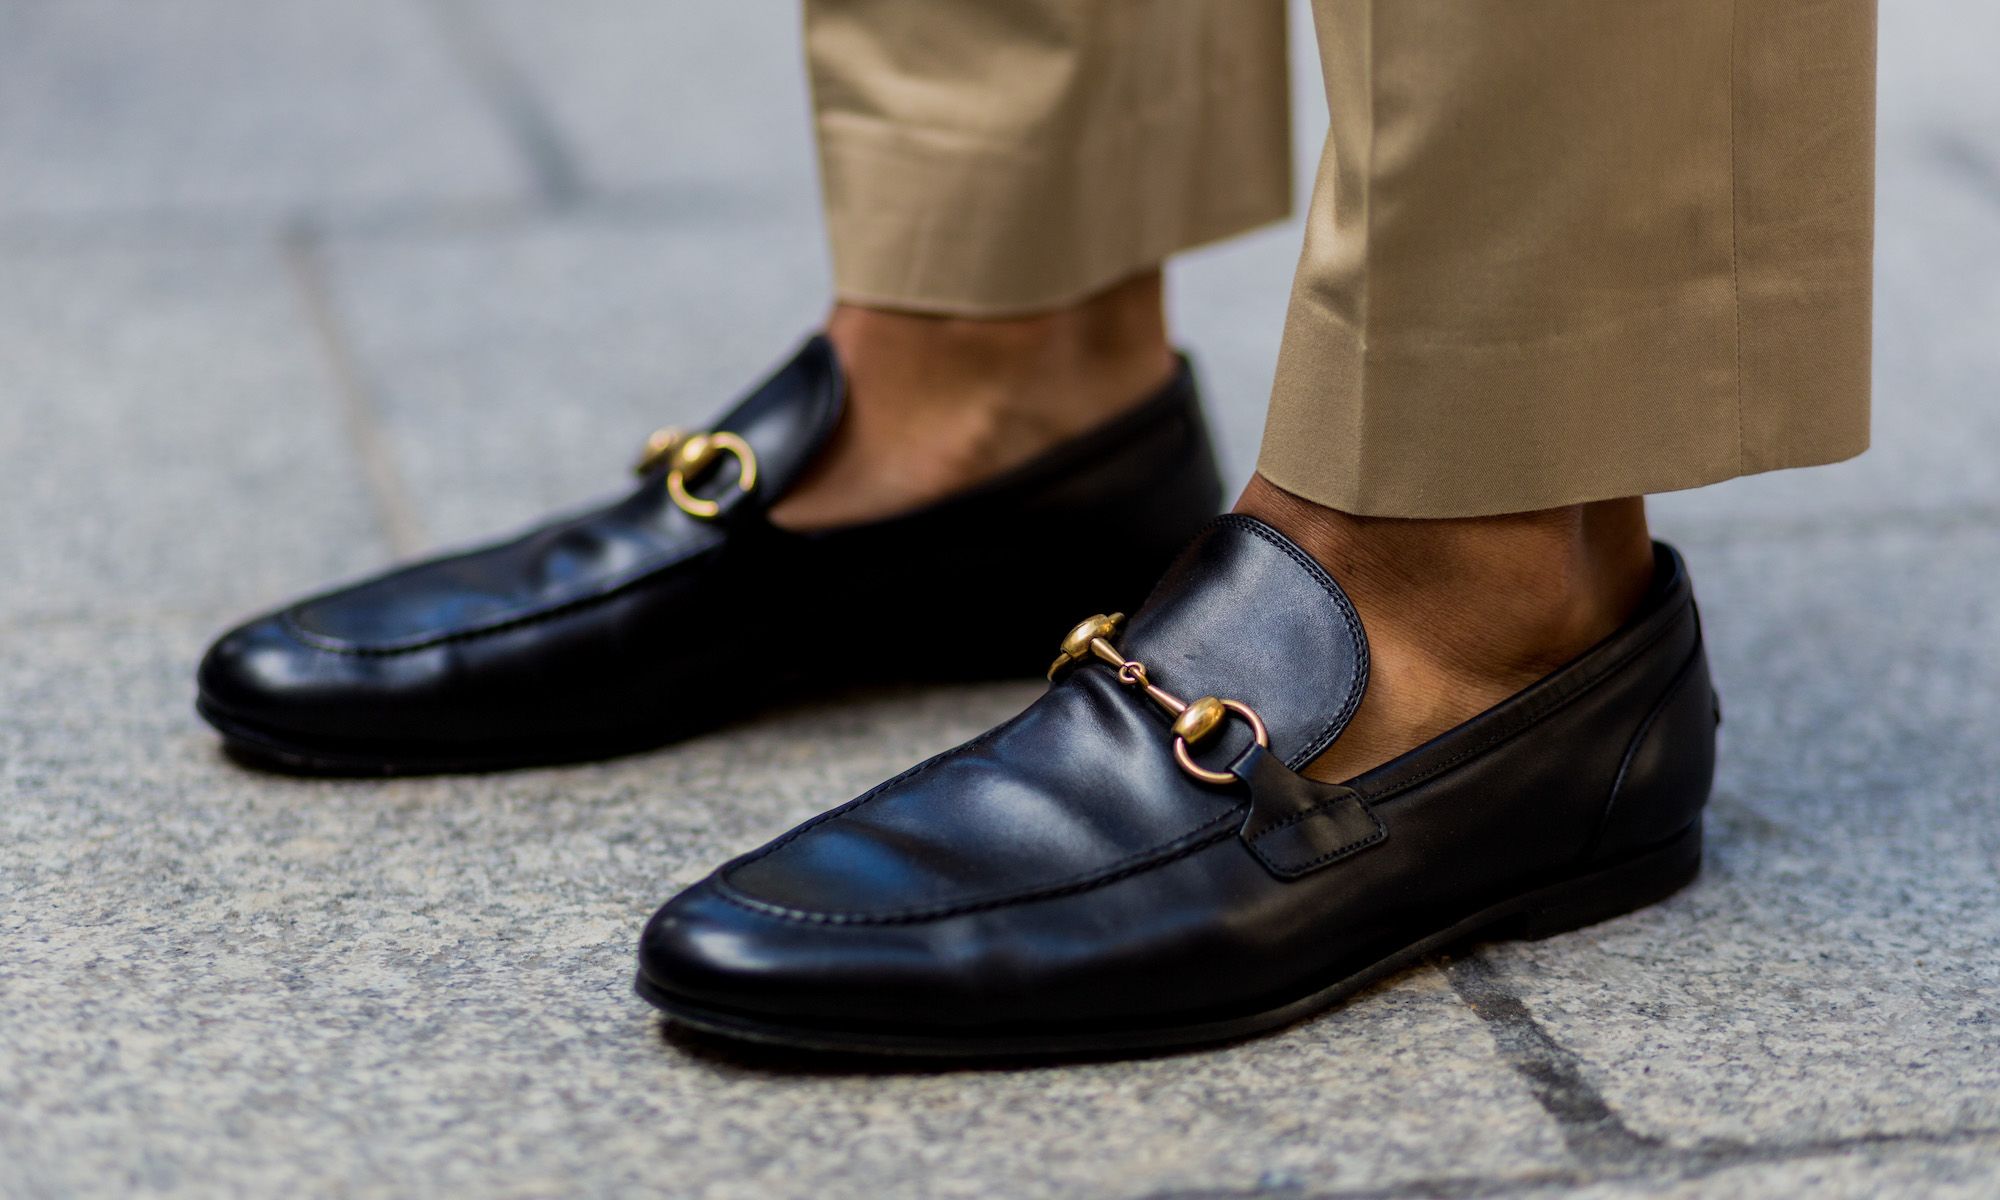 Gucci’s horsebit loafer is still a coveted status symbol 70 years on | CNN